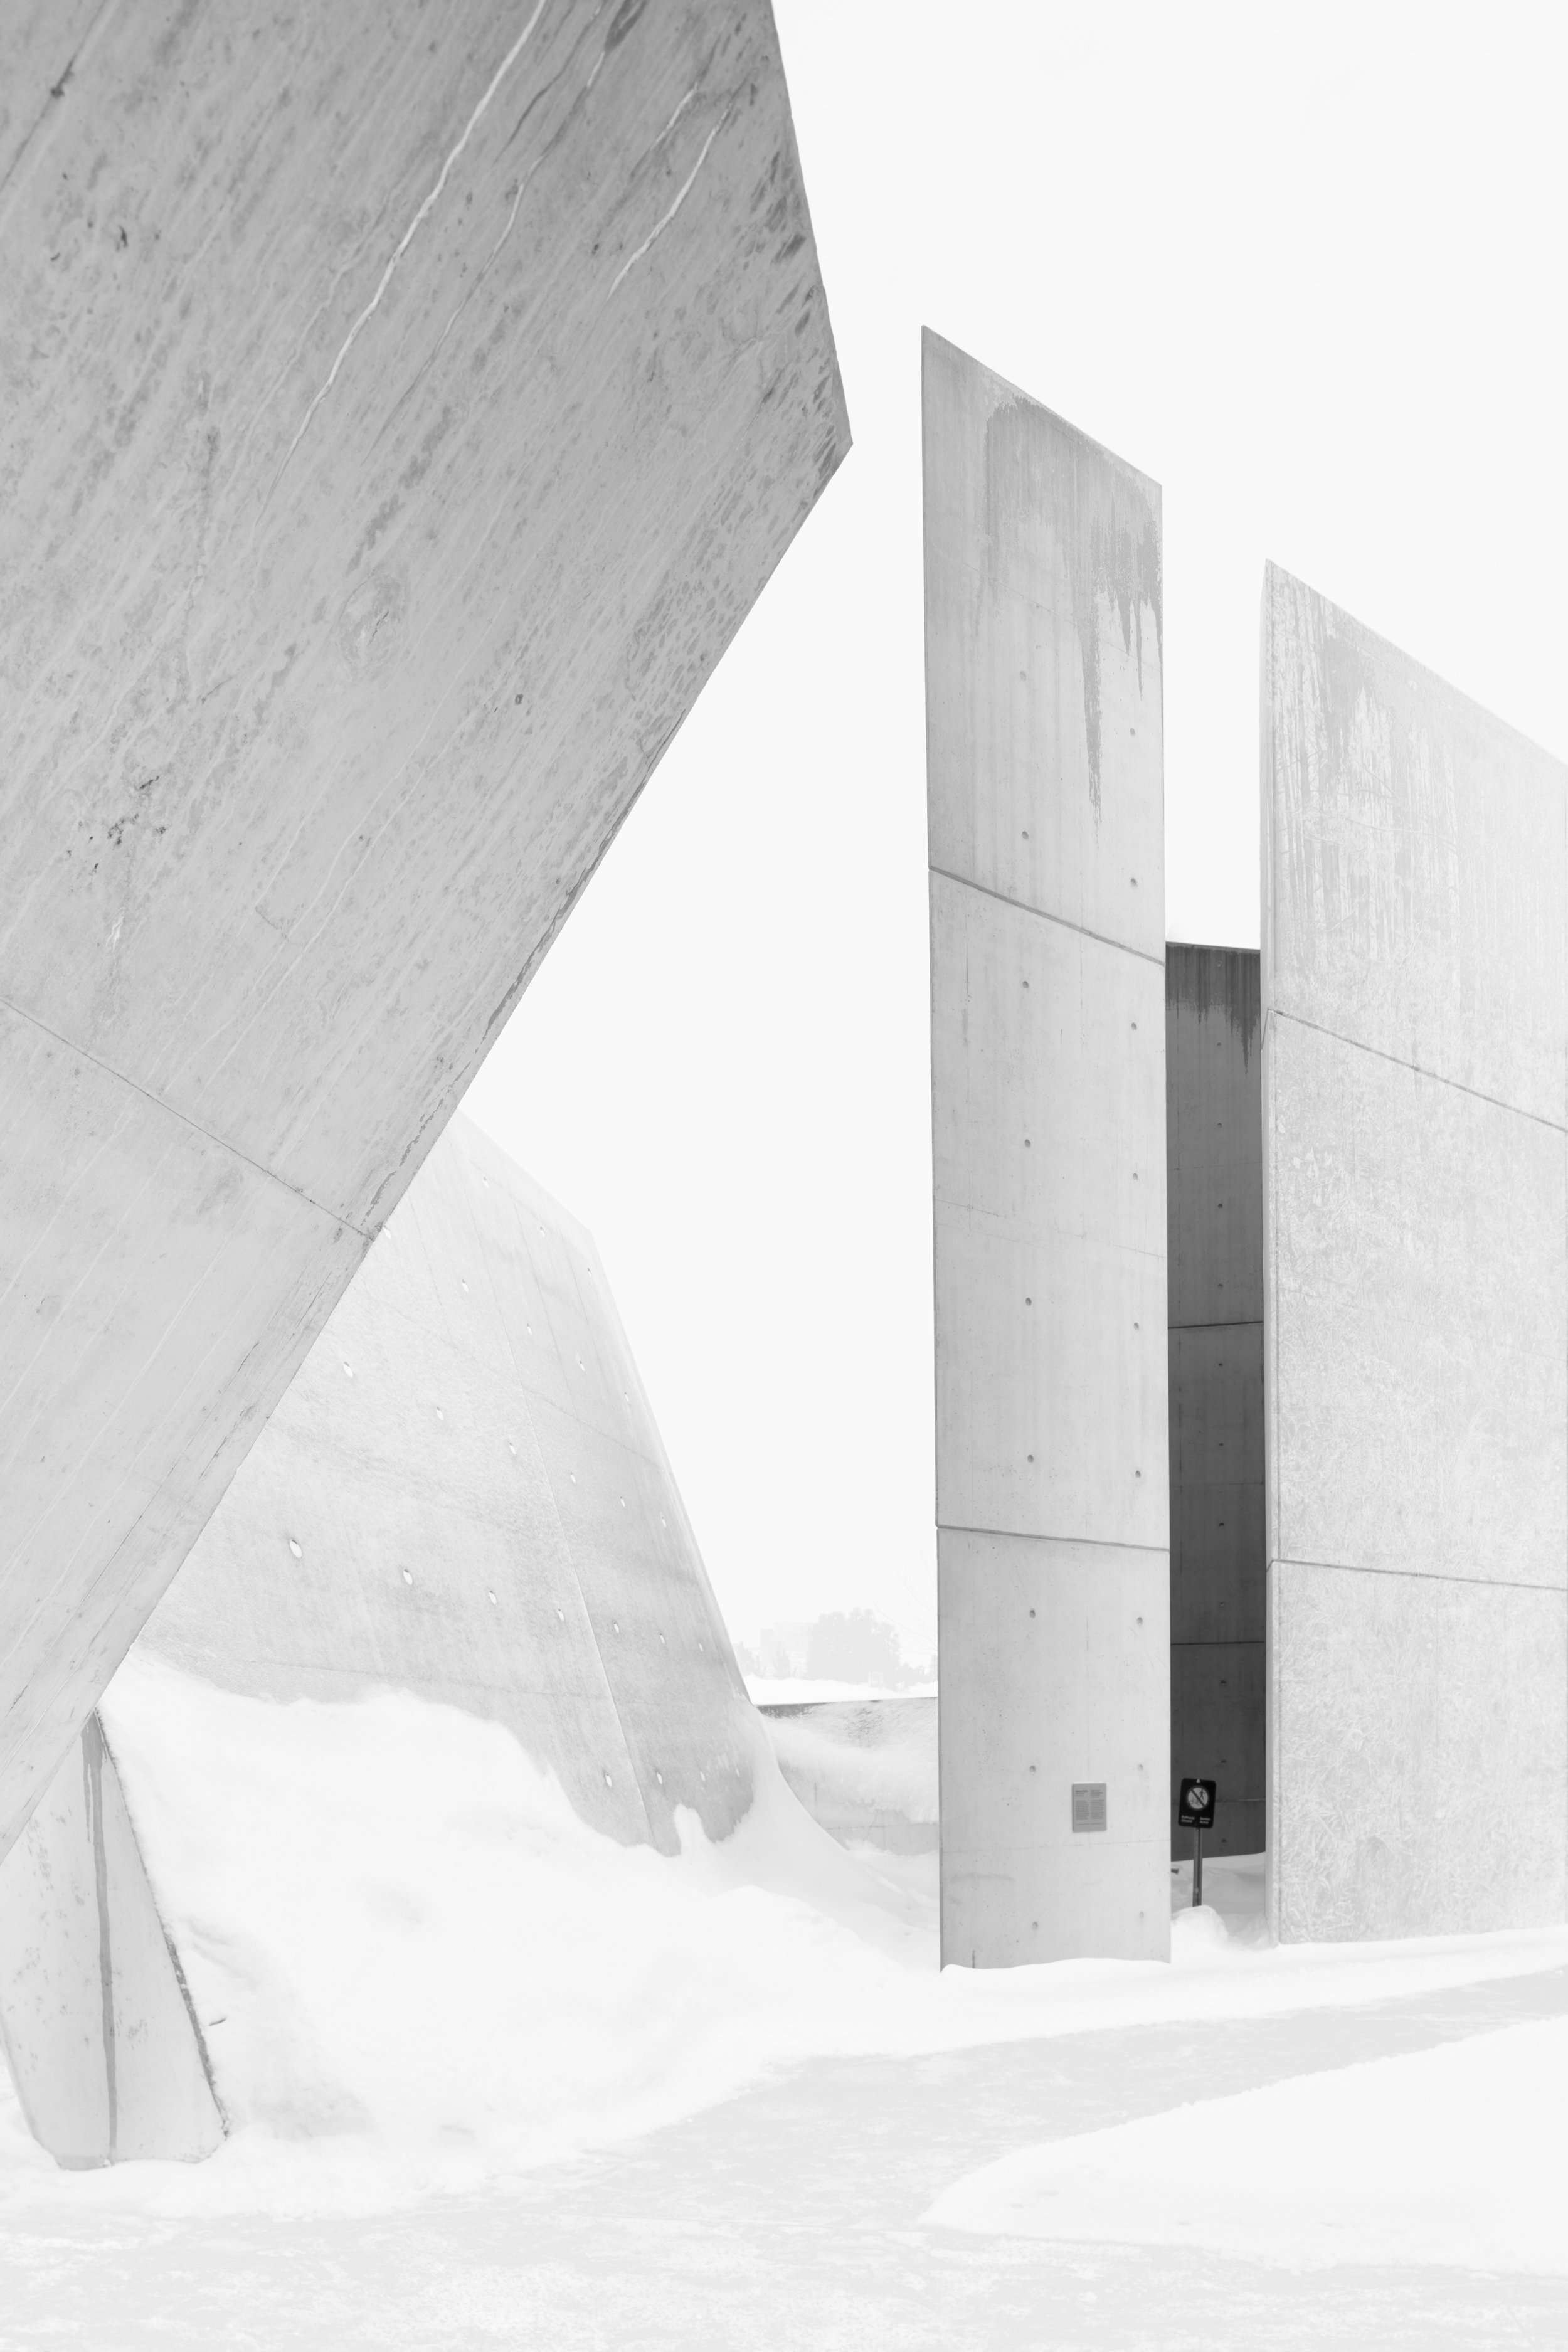  When I visited the National Holocaust Memorial in Ottawa it was a bitterly cold day with snow swirling through the structure. And yet despite the brutal architecture and environment there was a sense of hope and perseverance. For each obstacle and d